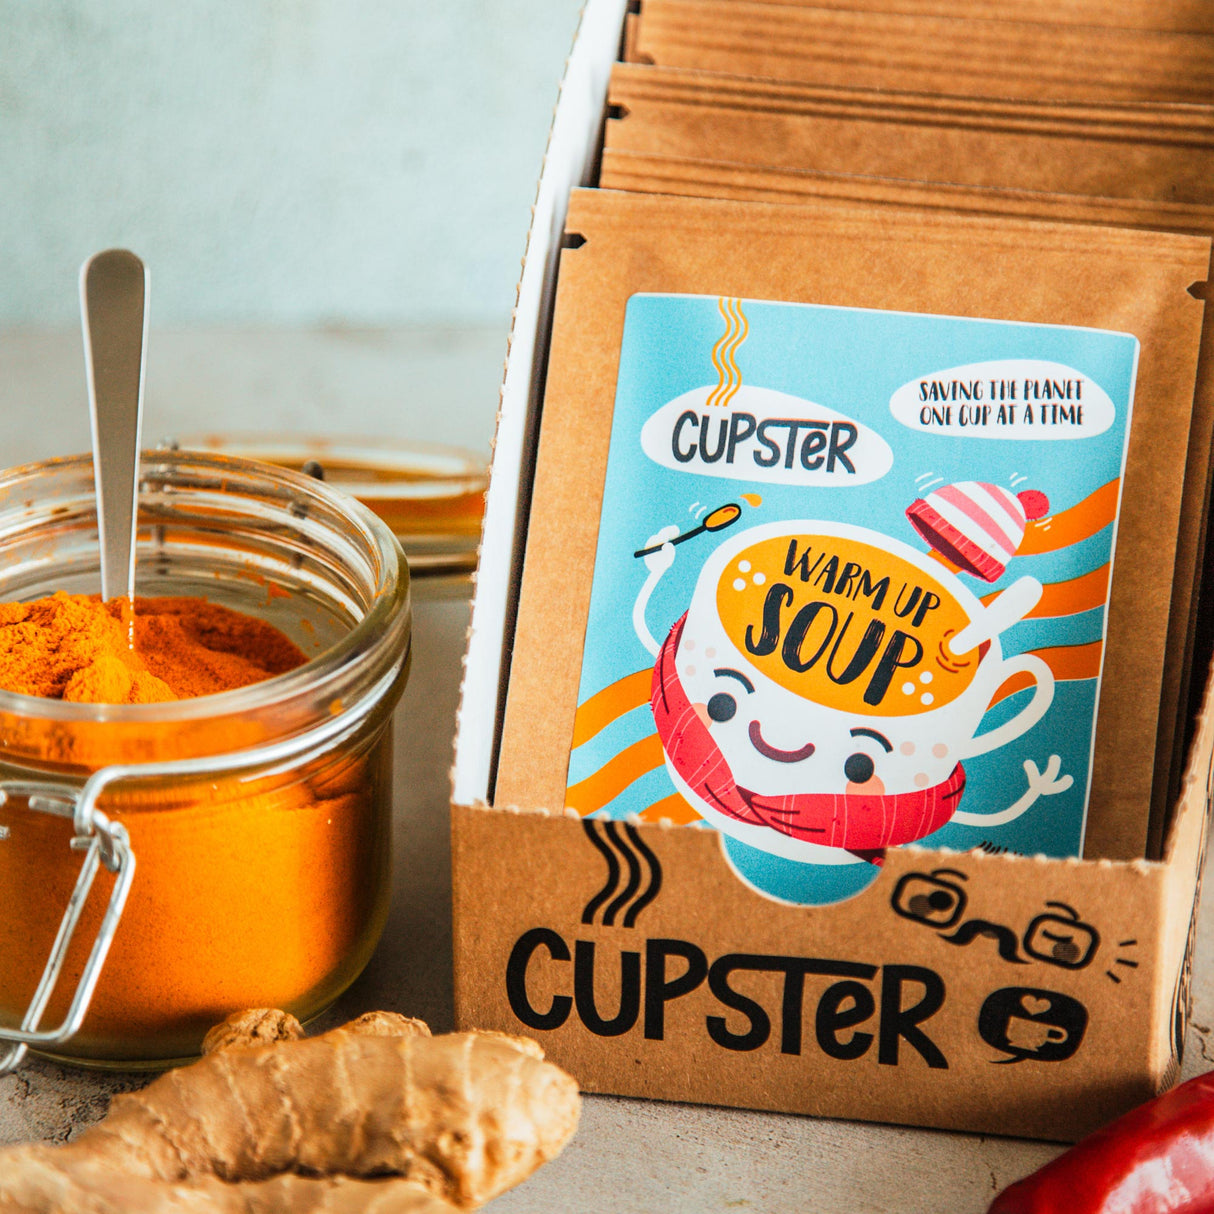 Cupster instant erőleves 21g